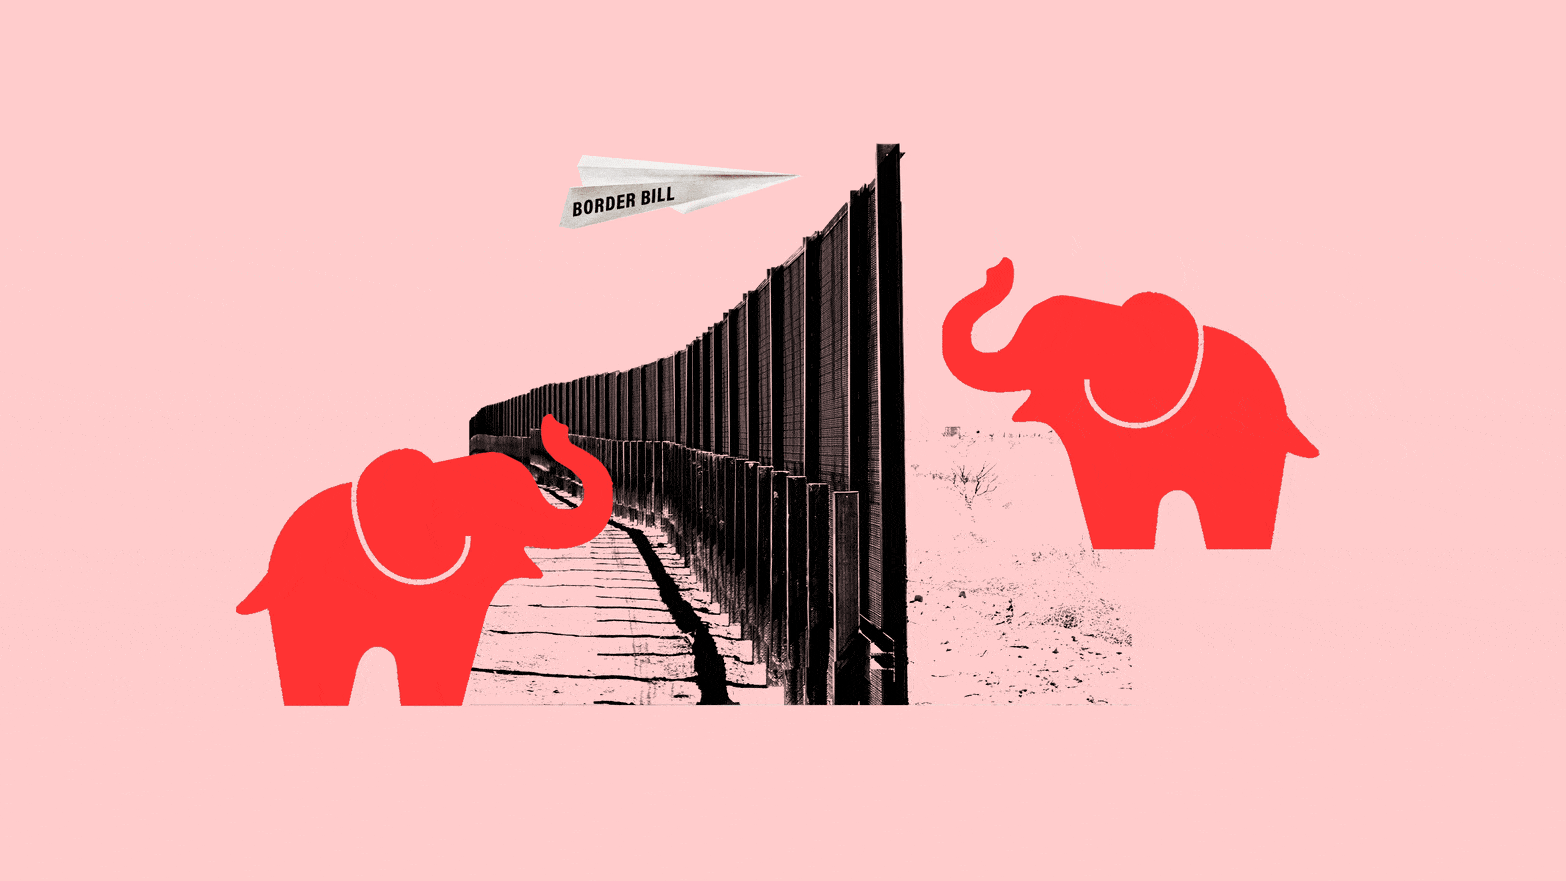 A photo illustration of two red elephants tossing a paper airplane back and forth over the border wall